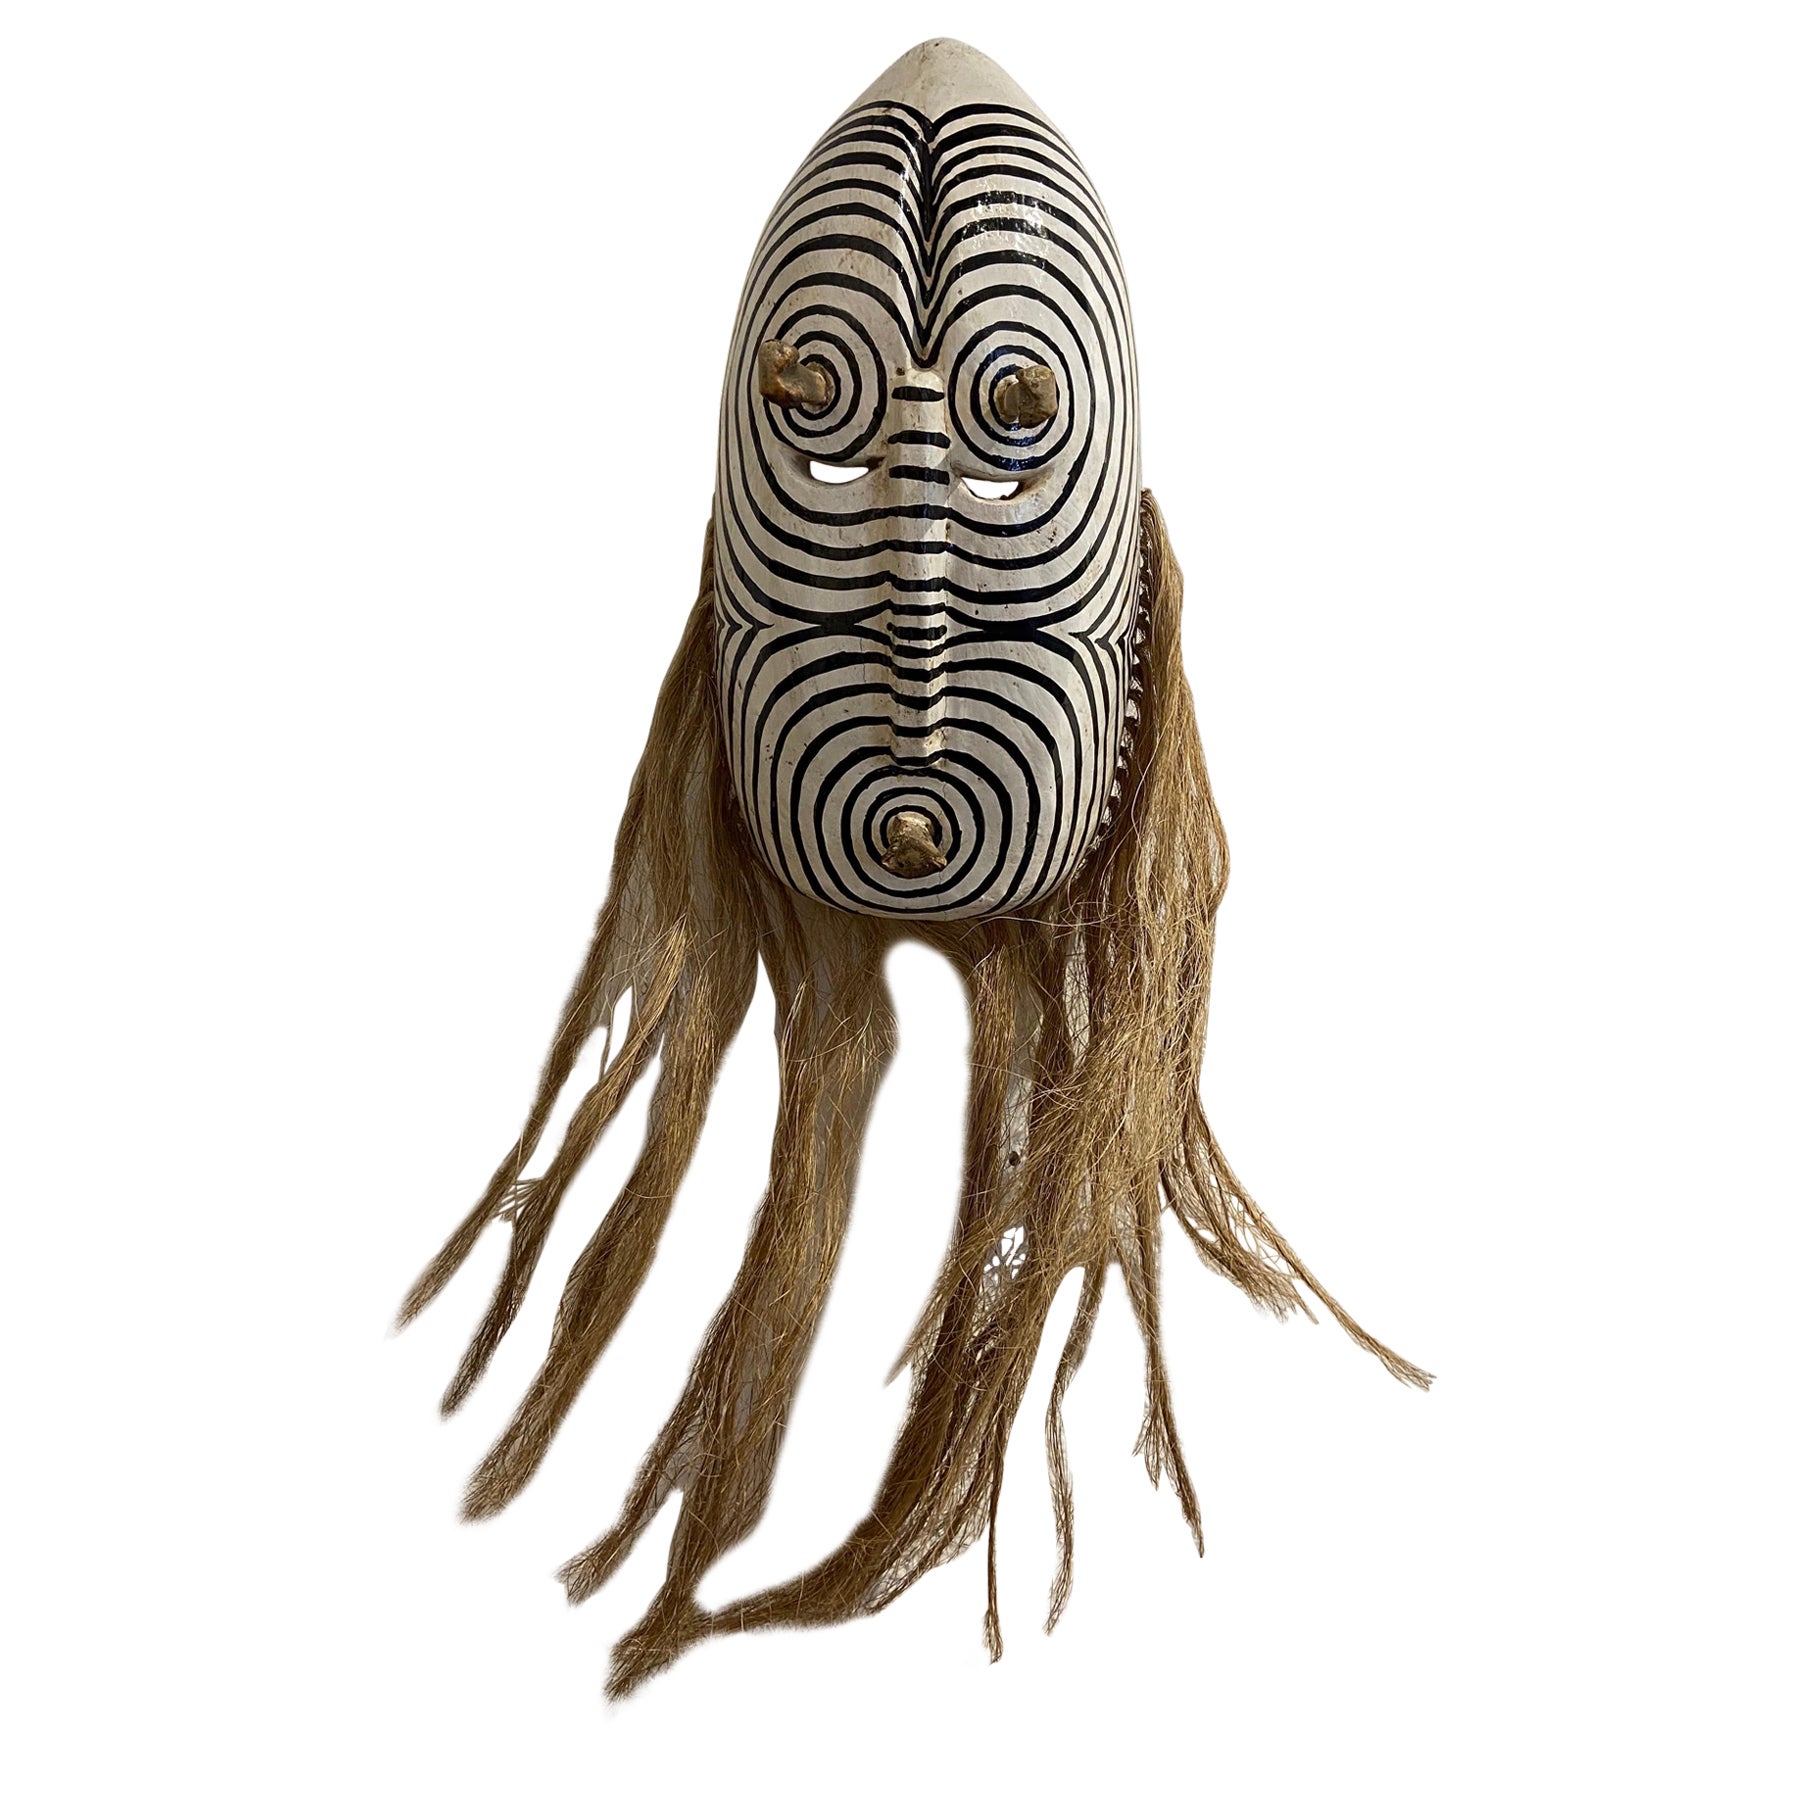 Contemporary Seri Mask from Mexico